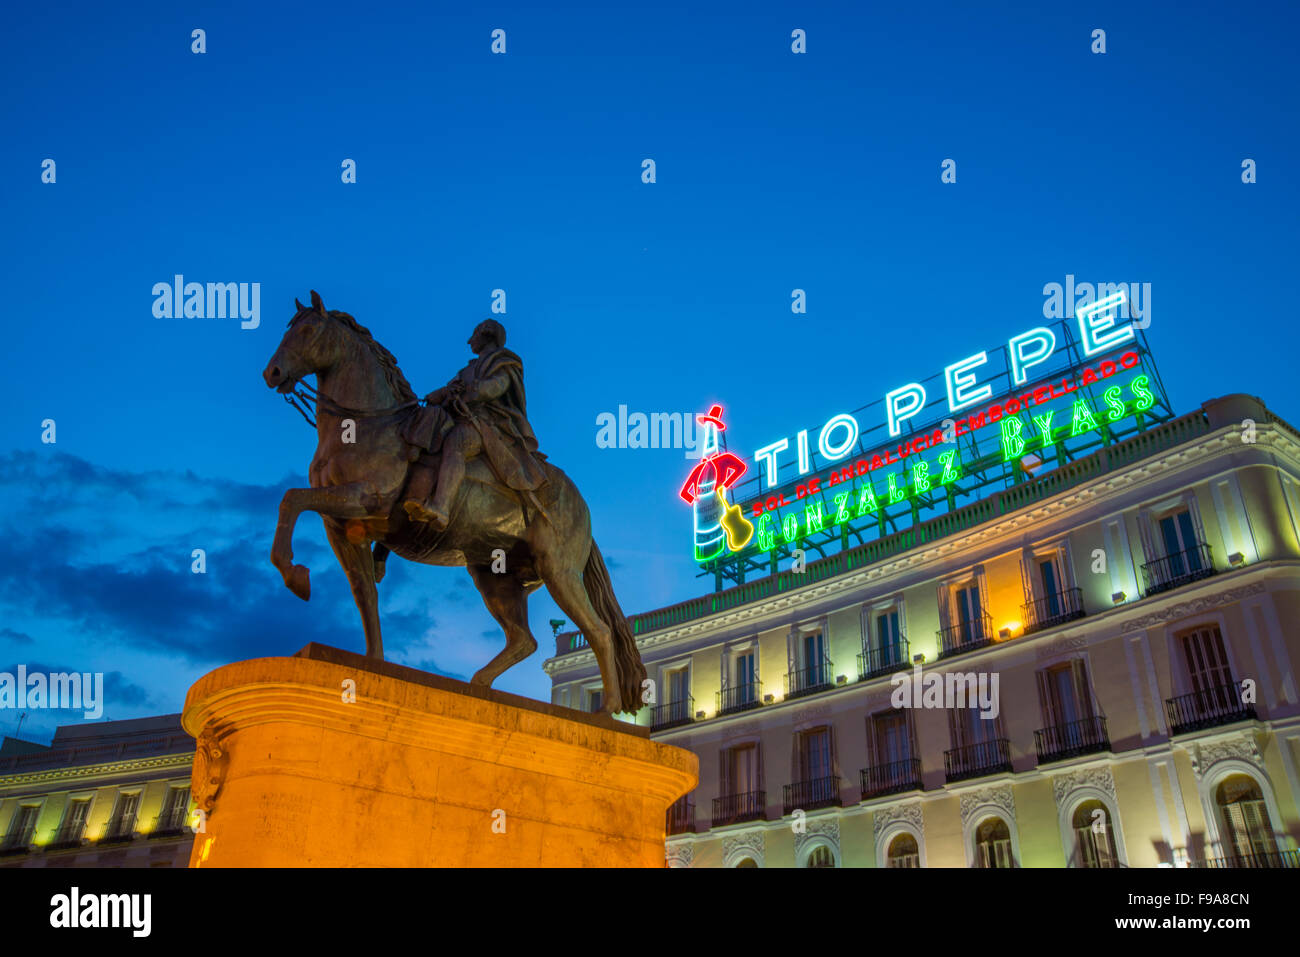 Tio Pepe neon sign on its new location and Carlos III statue, night view. Puerta del Sol, Madrid, Spain. Stock Photo